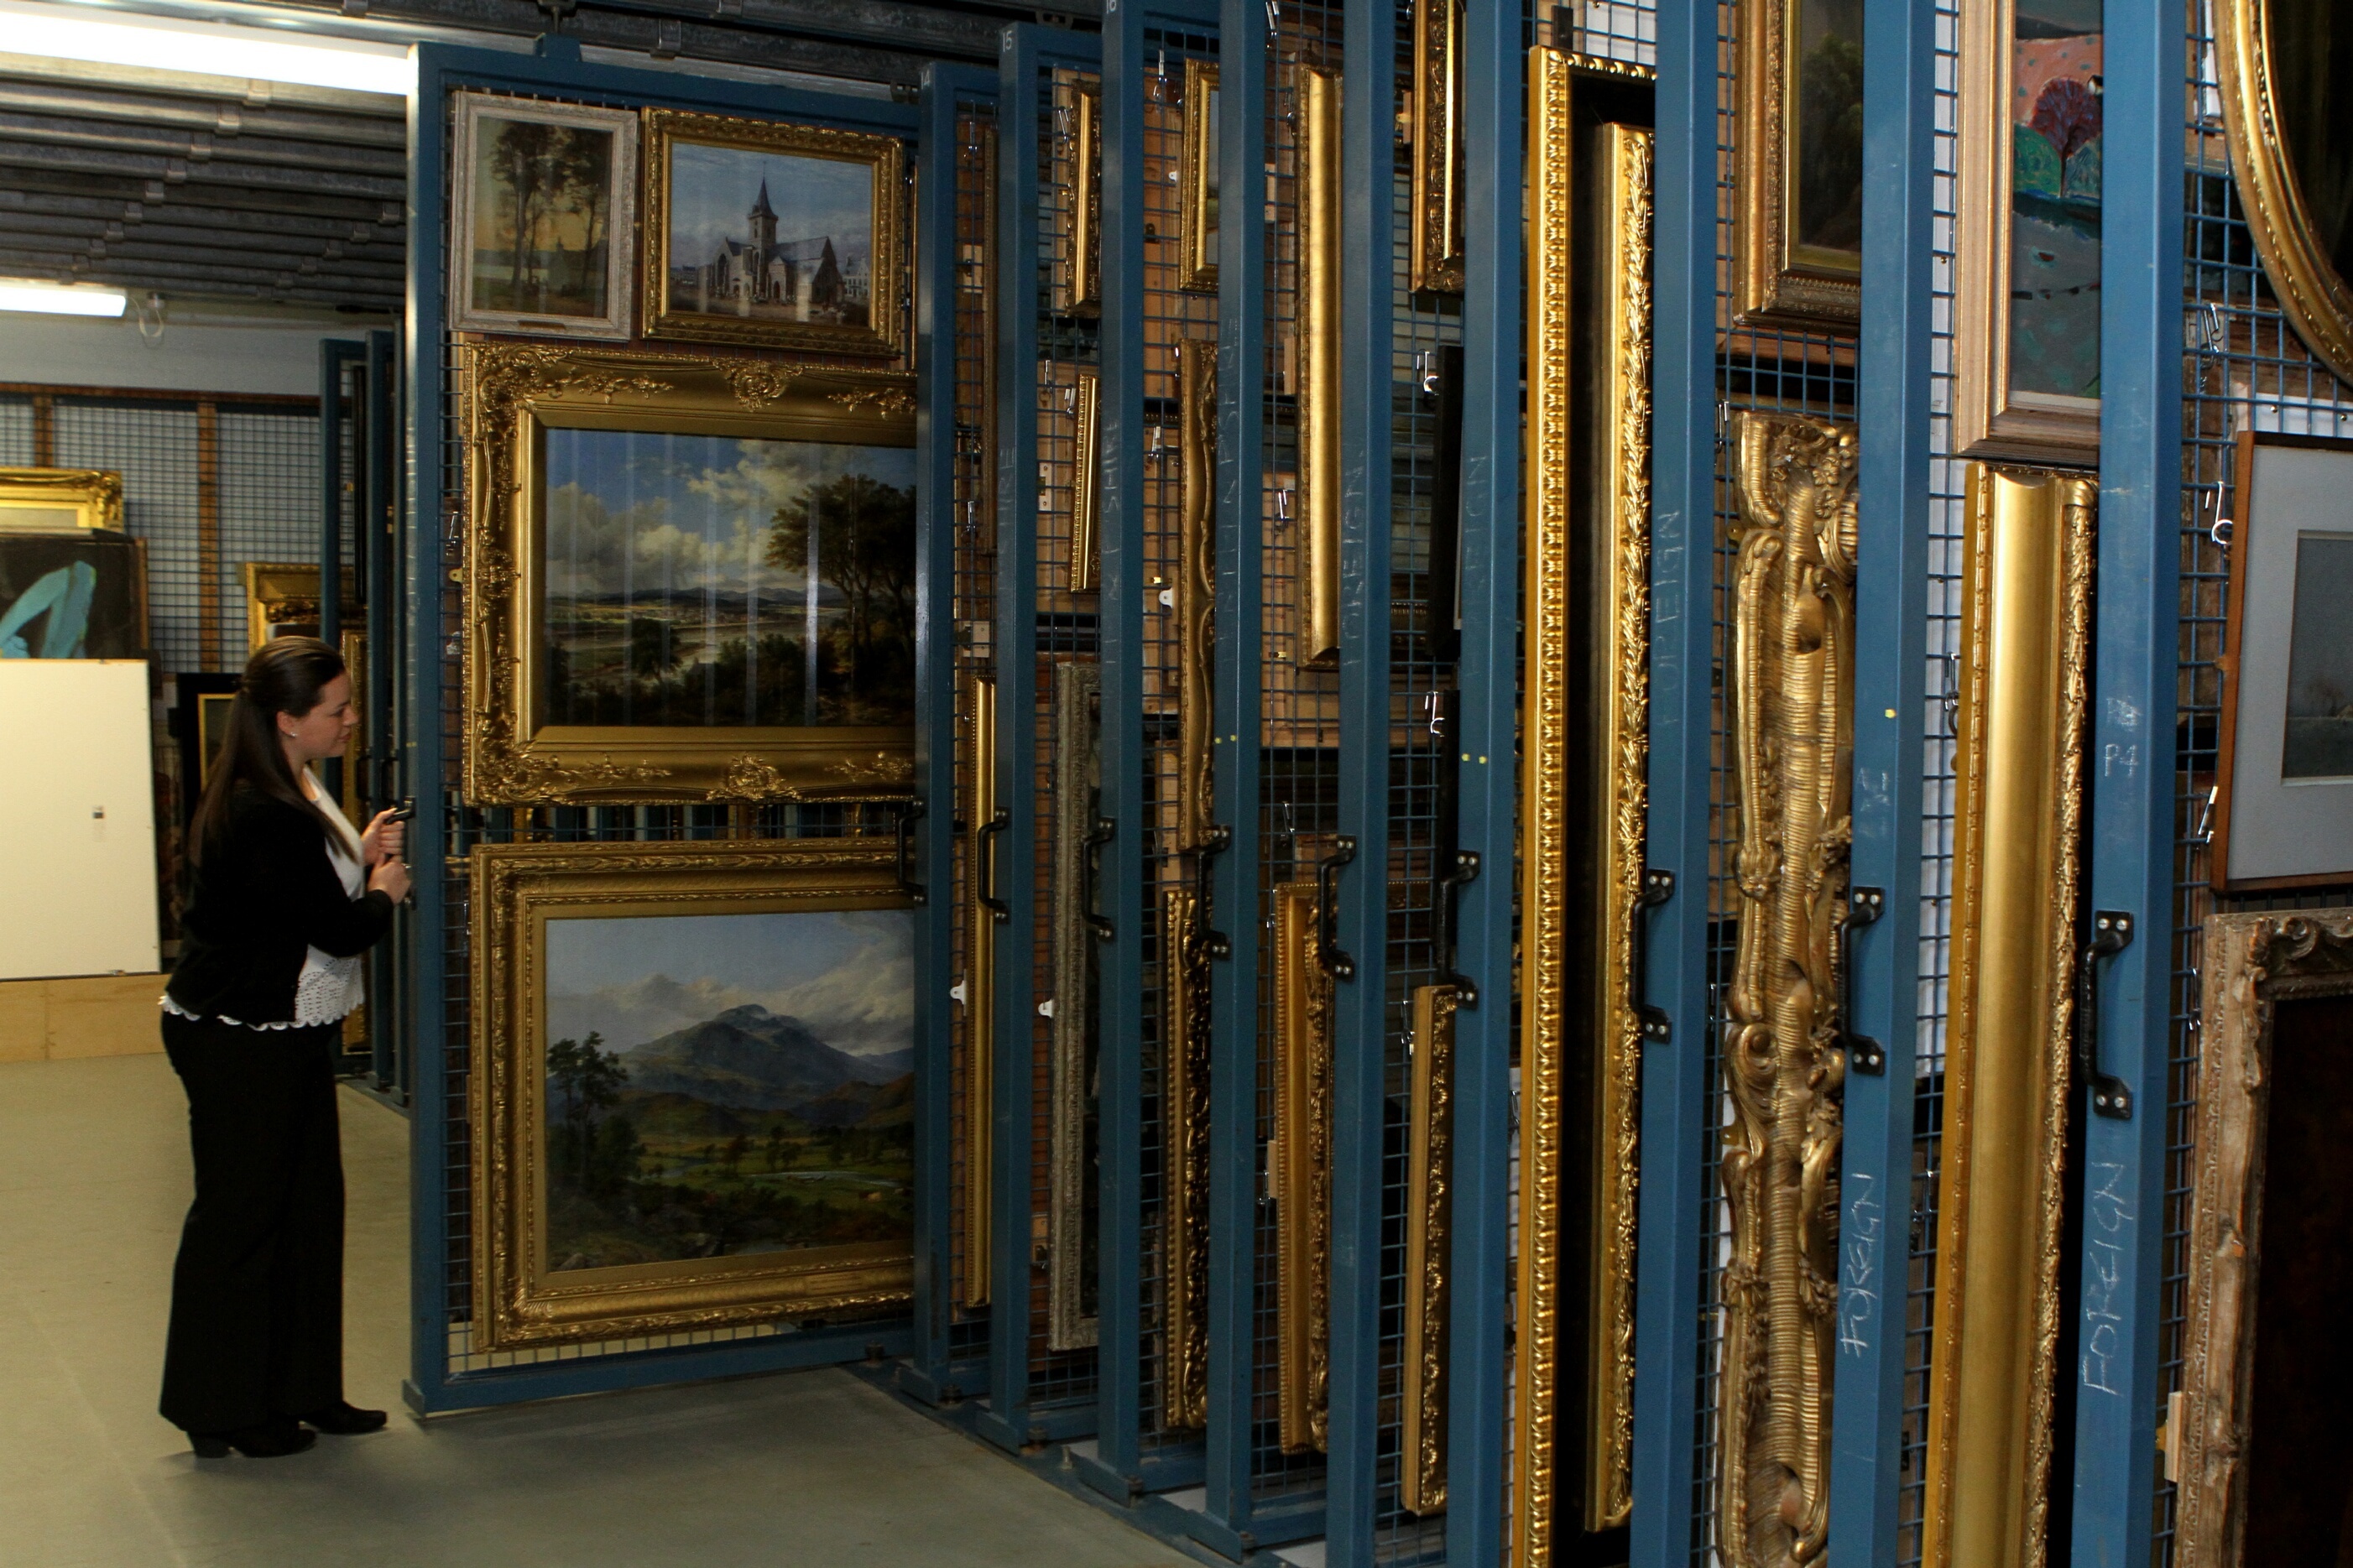 Some of the many paintings stored in the basement